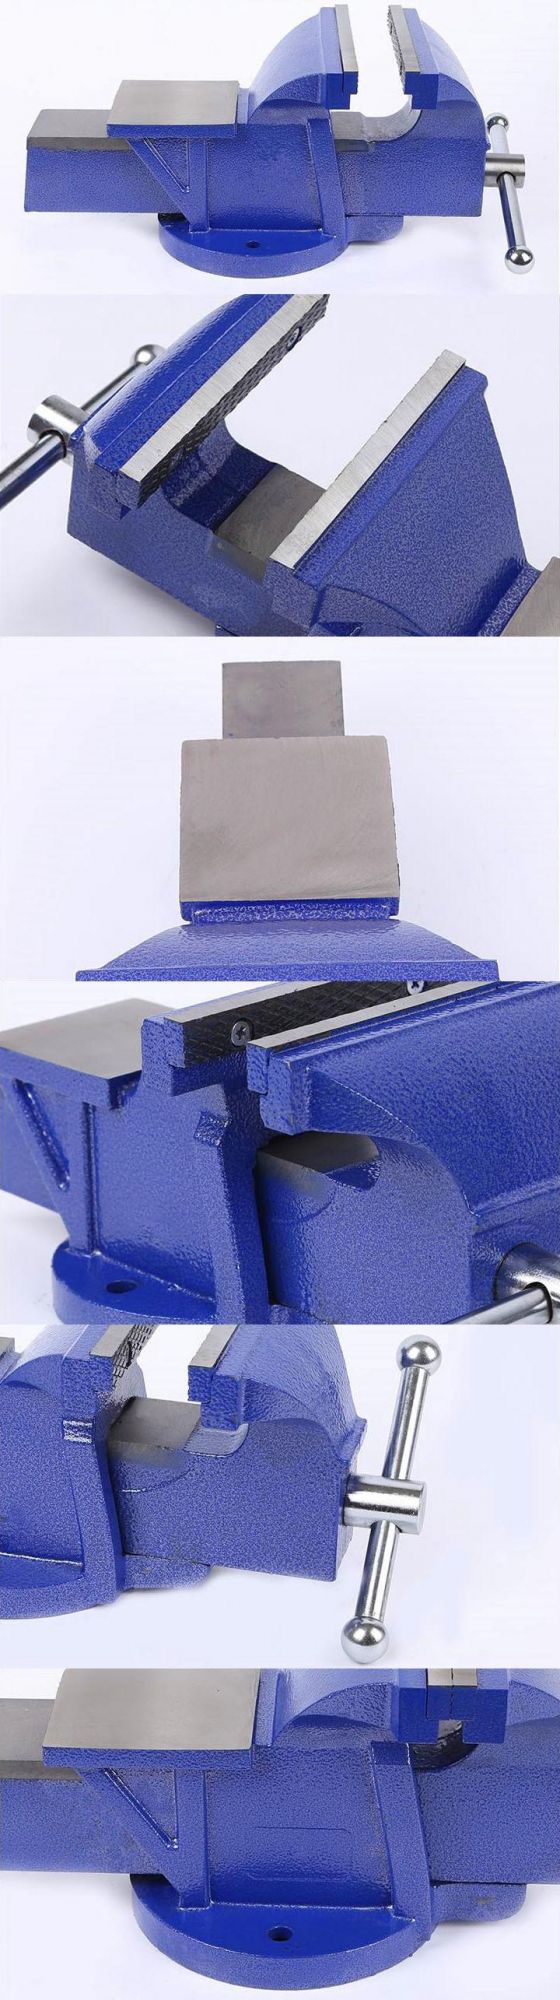 5 Inch Heavy Reinforced Base Bench Vise